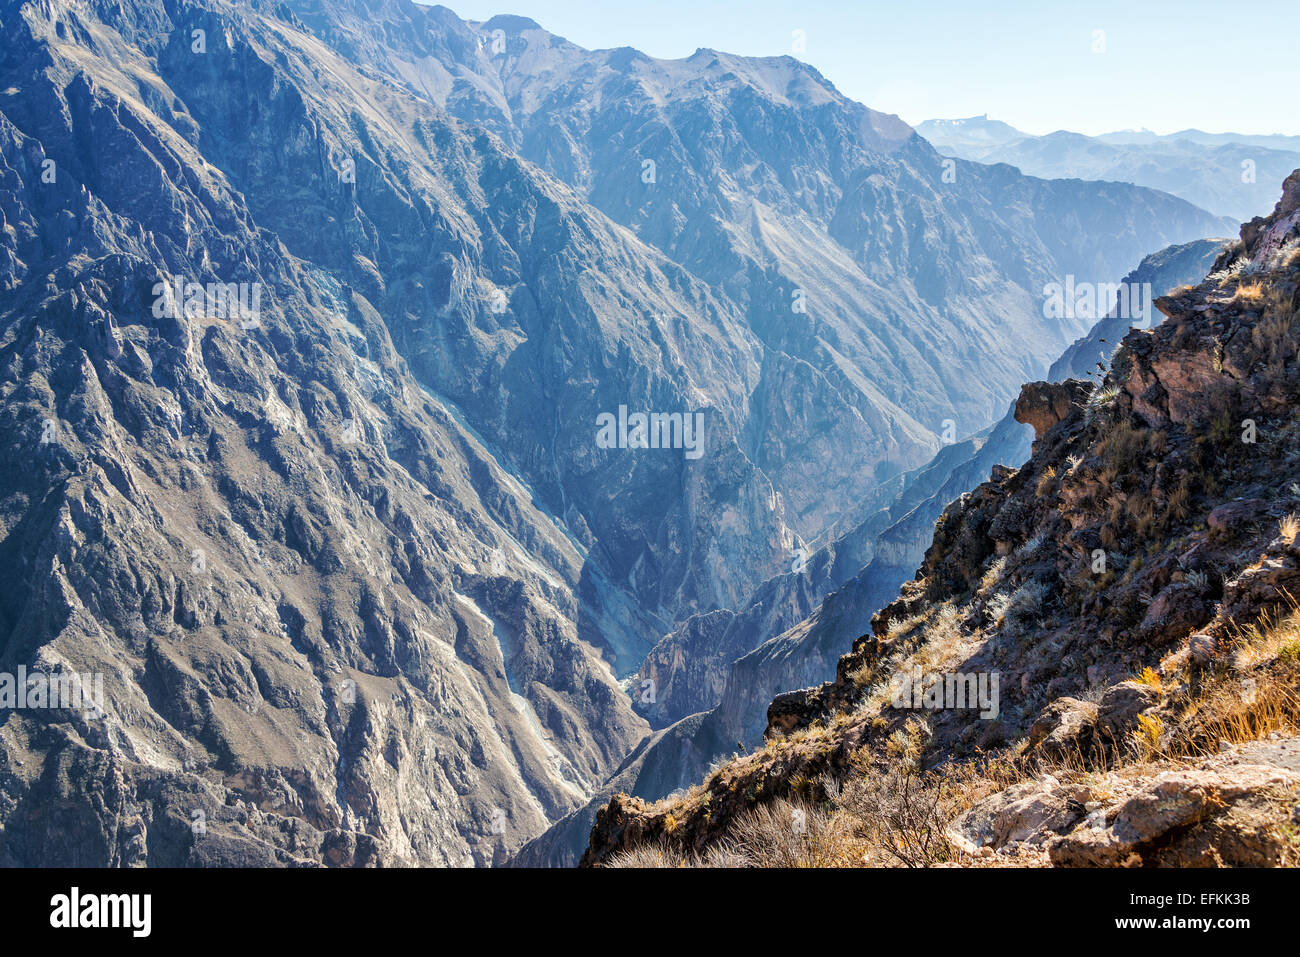 View of the rugged Colca Canyon near Arequipa, Peru Stock Photo